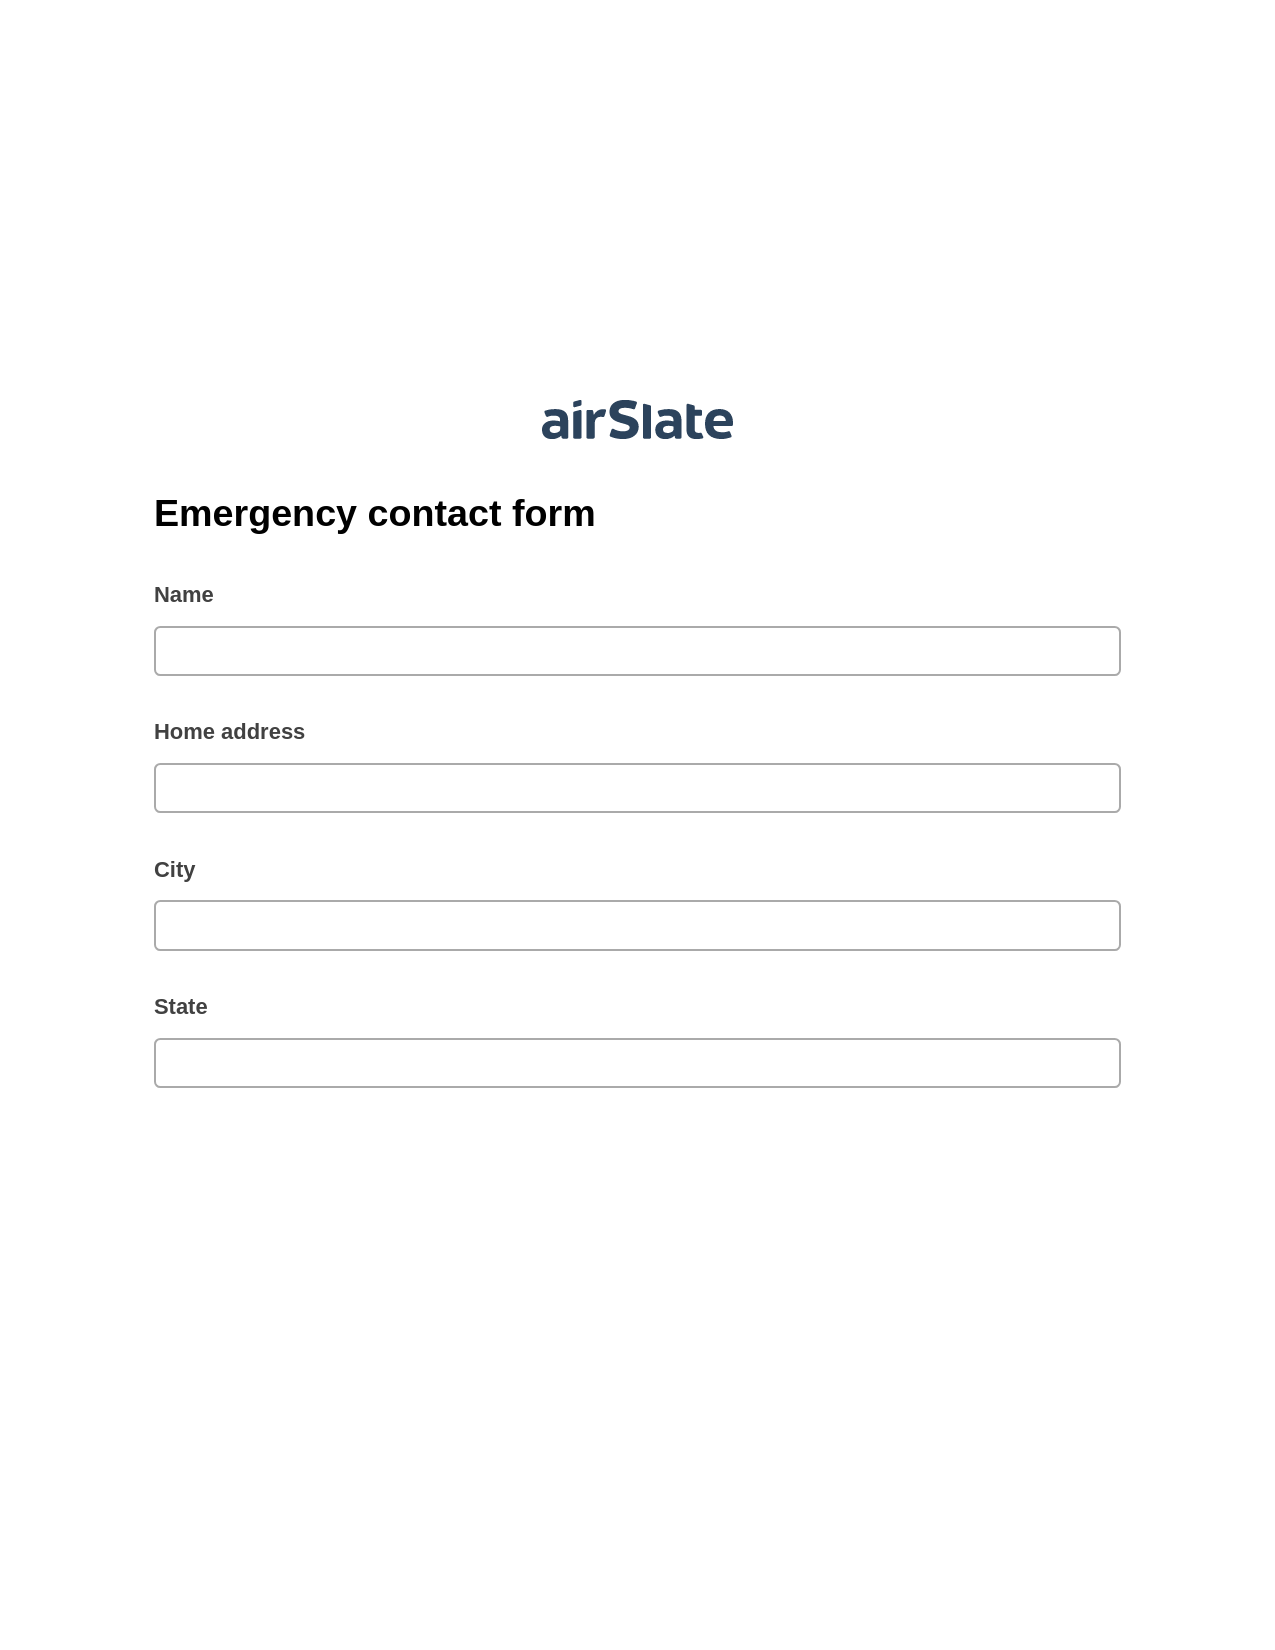 Emergency contact form Pre-fill Slate from MS Dynamics 365 Records Bot, Lock the slate bot, Archive to SharePoint Folder Bot